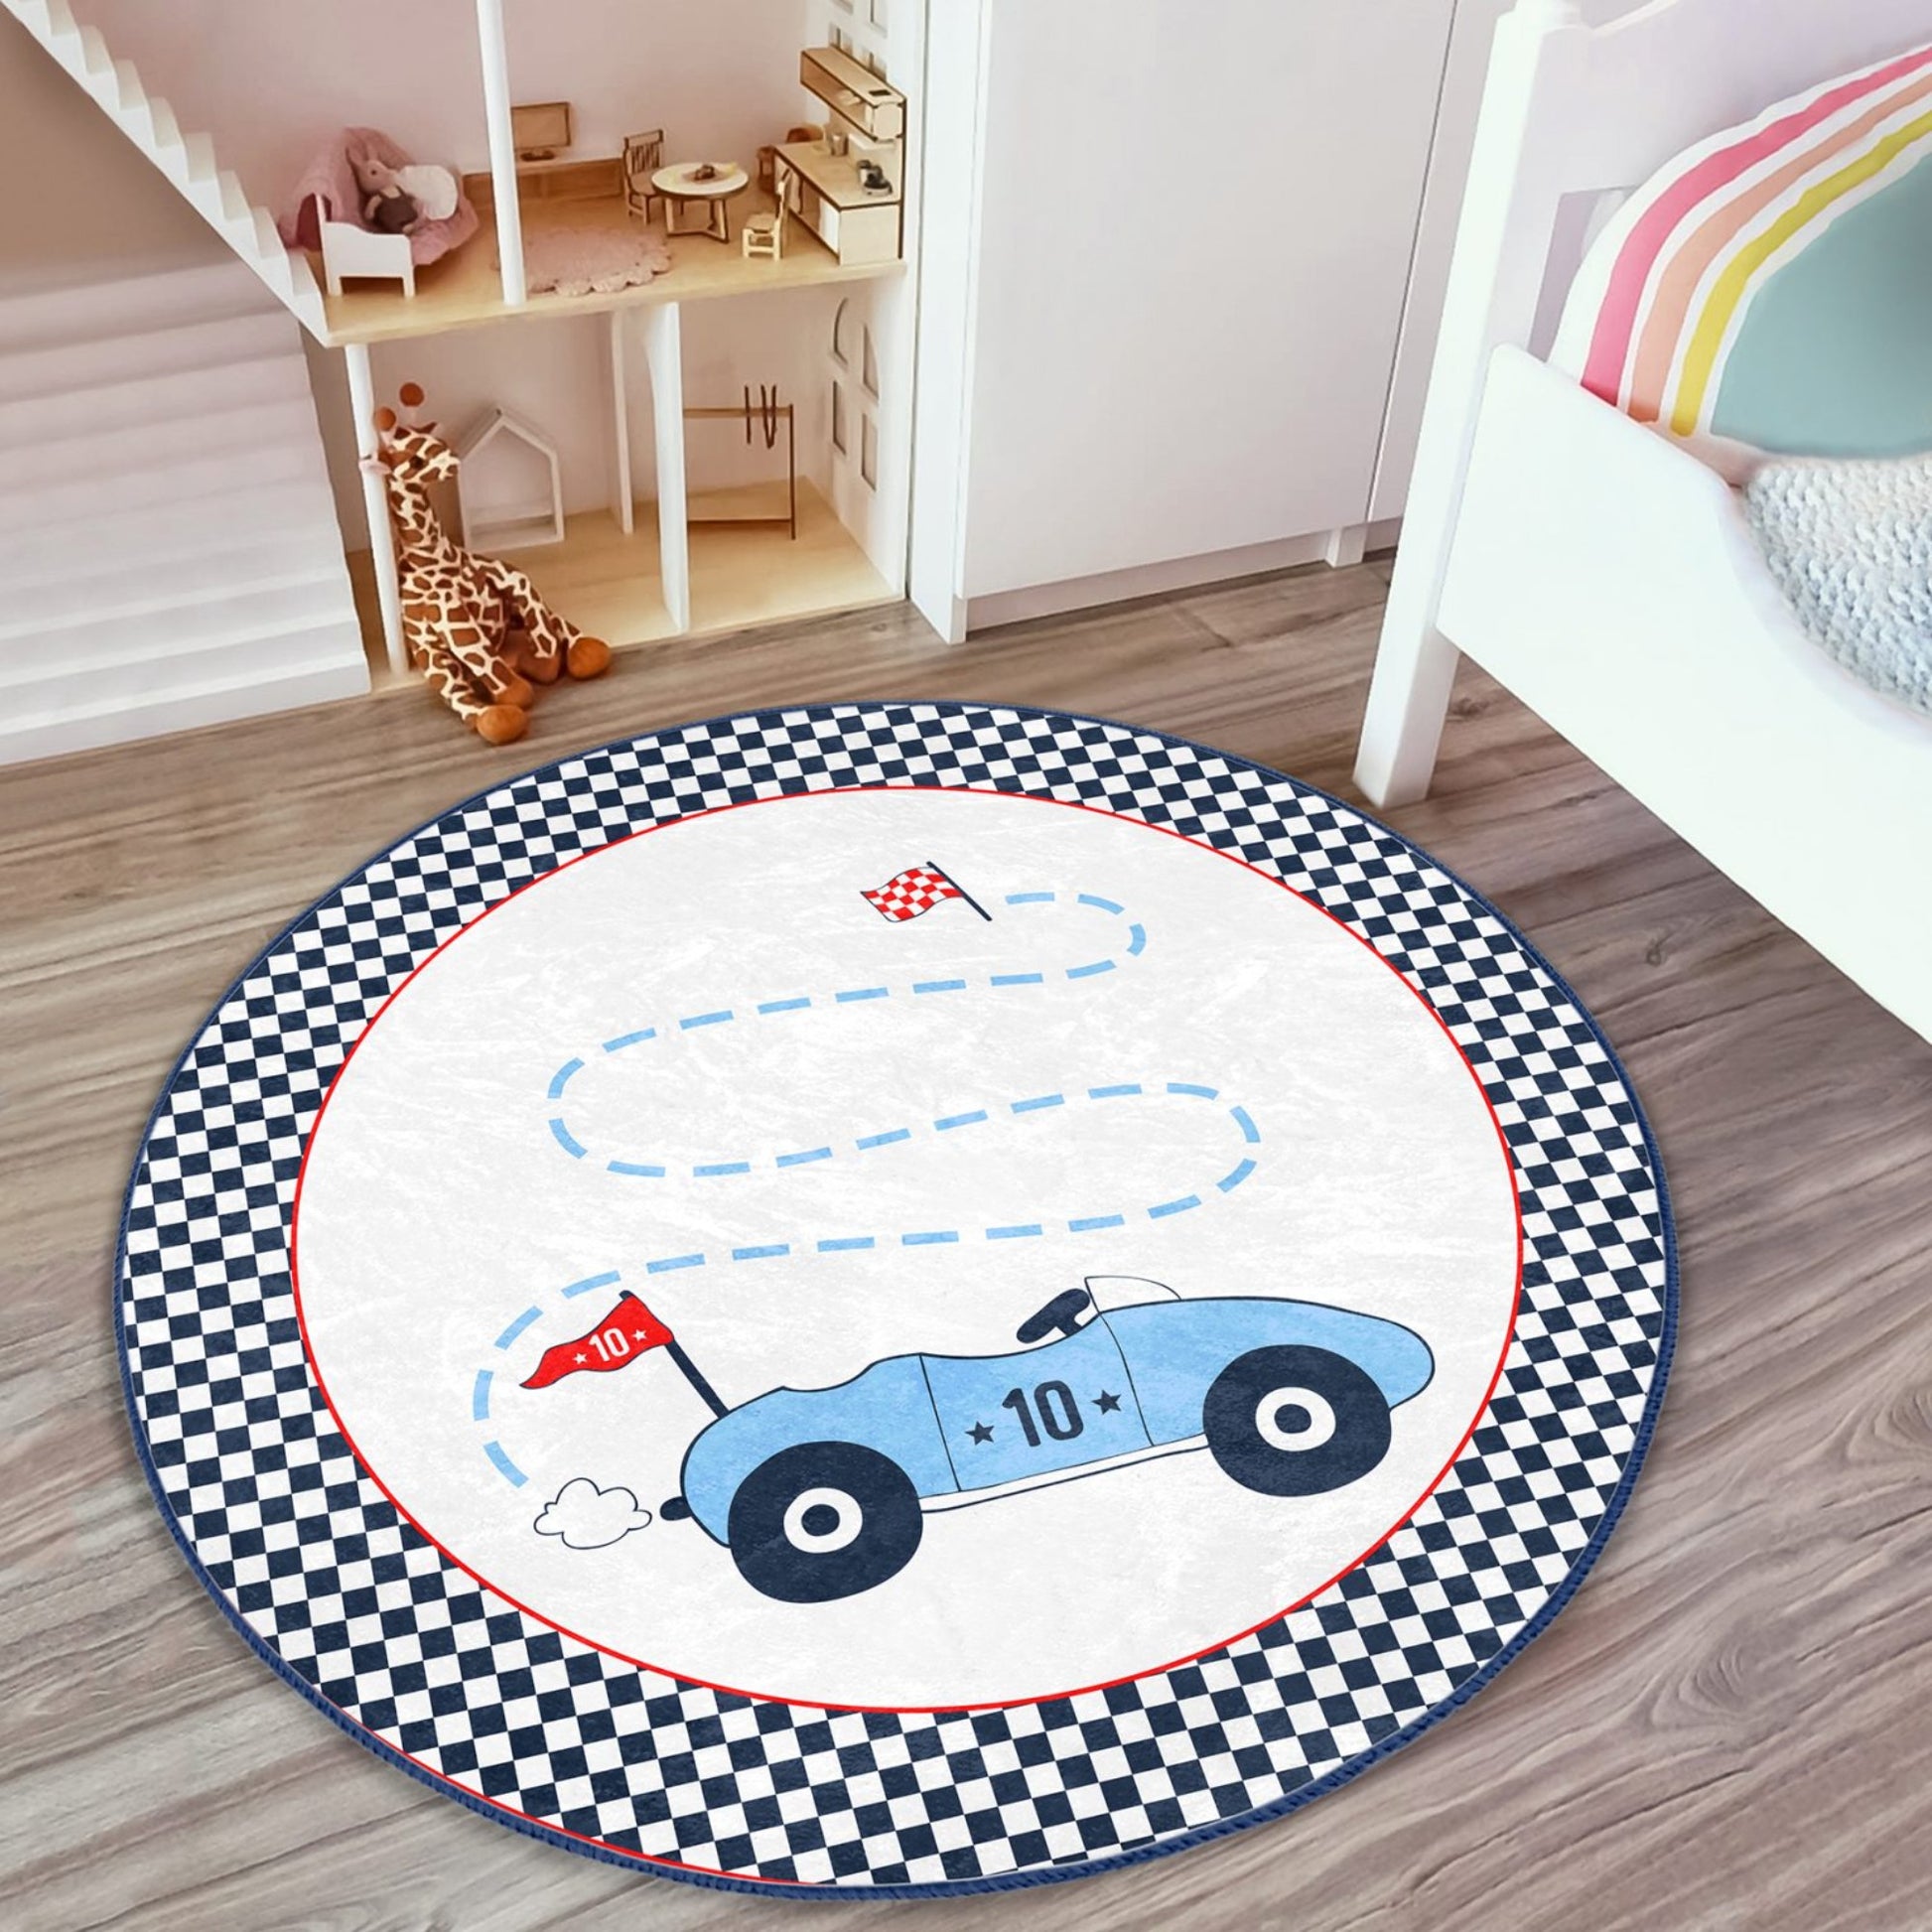 Round Racing Car Patterned Floor Rug - Charming Charm